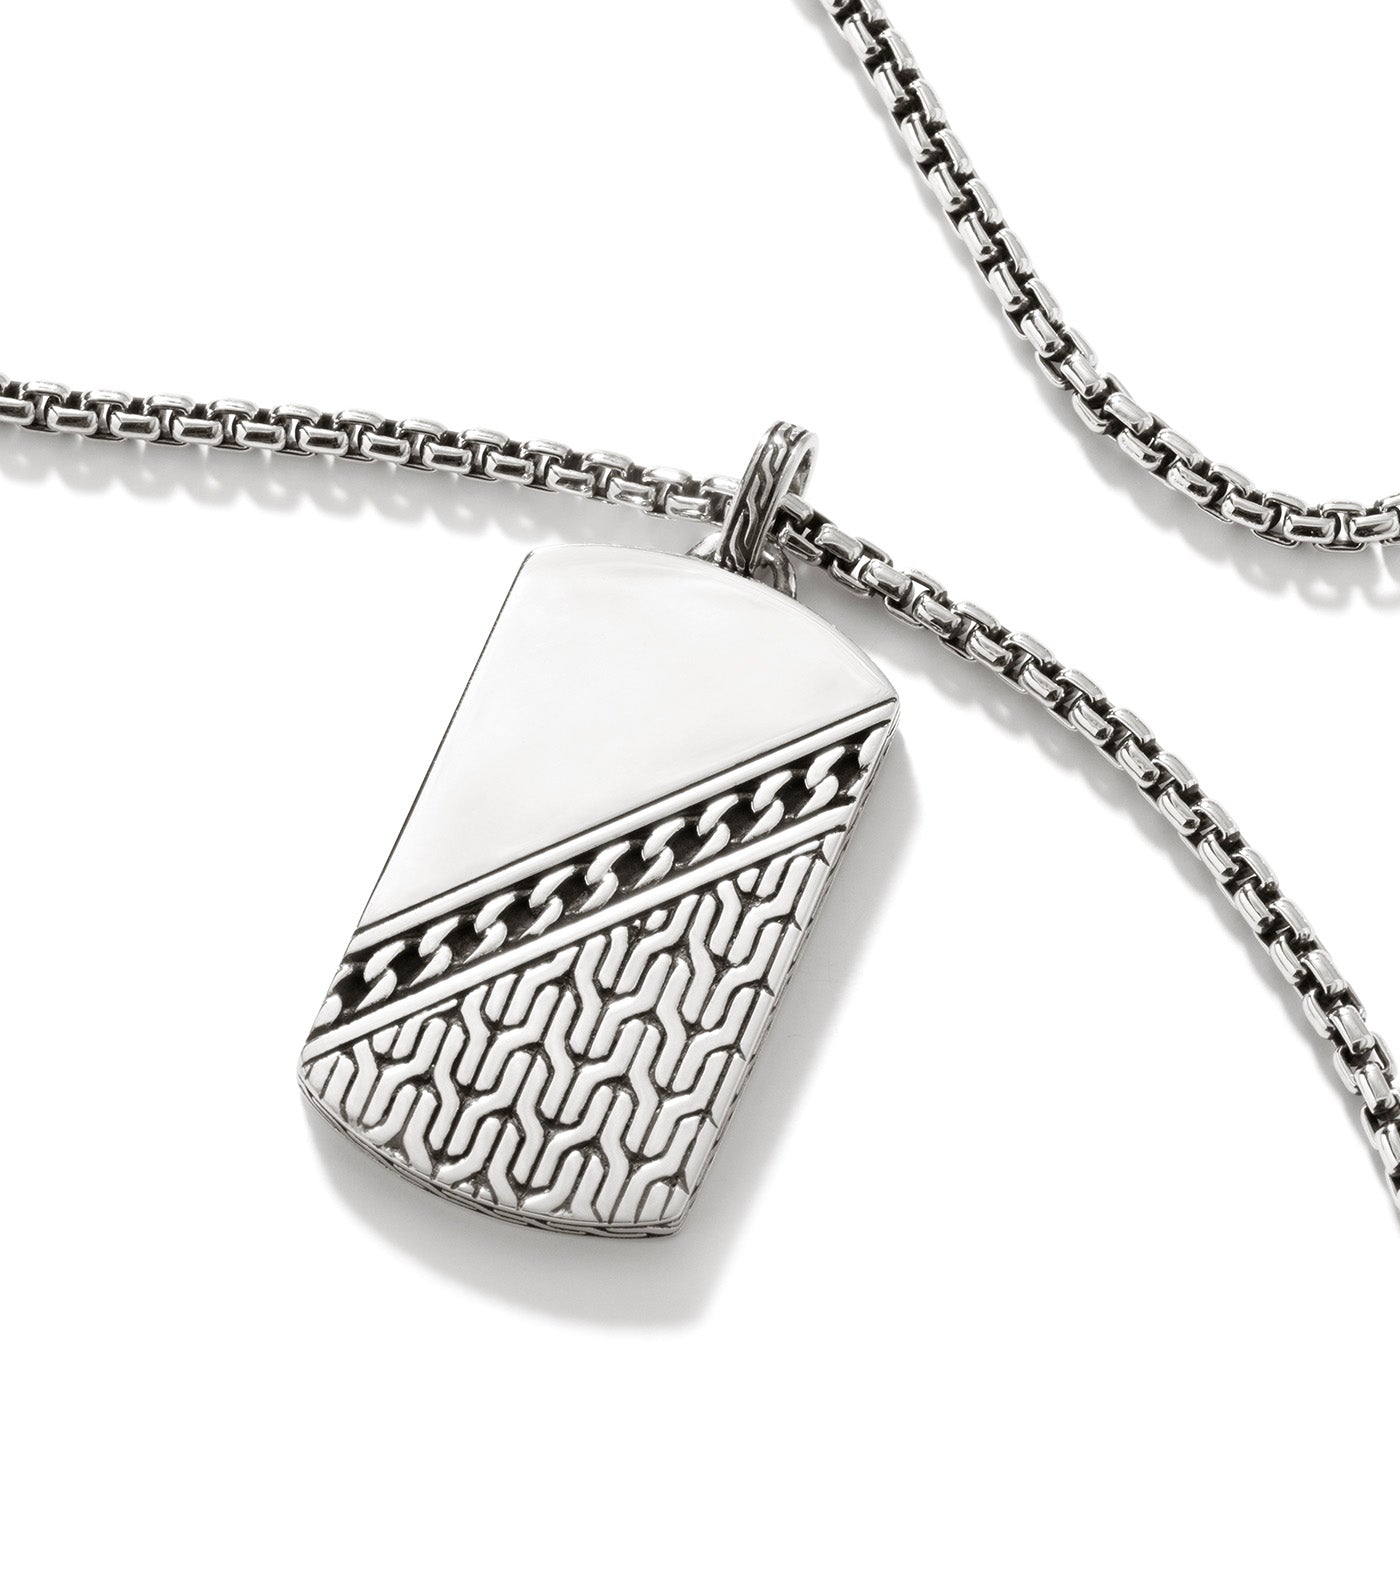 Carved Chain Dog Tag Pendant Sterling Silver